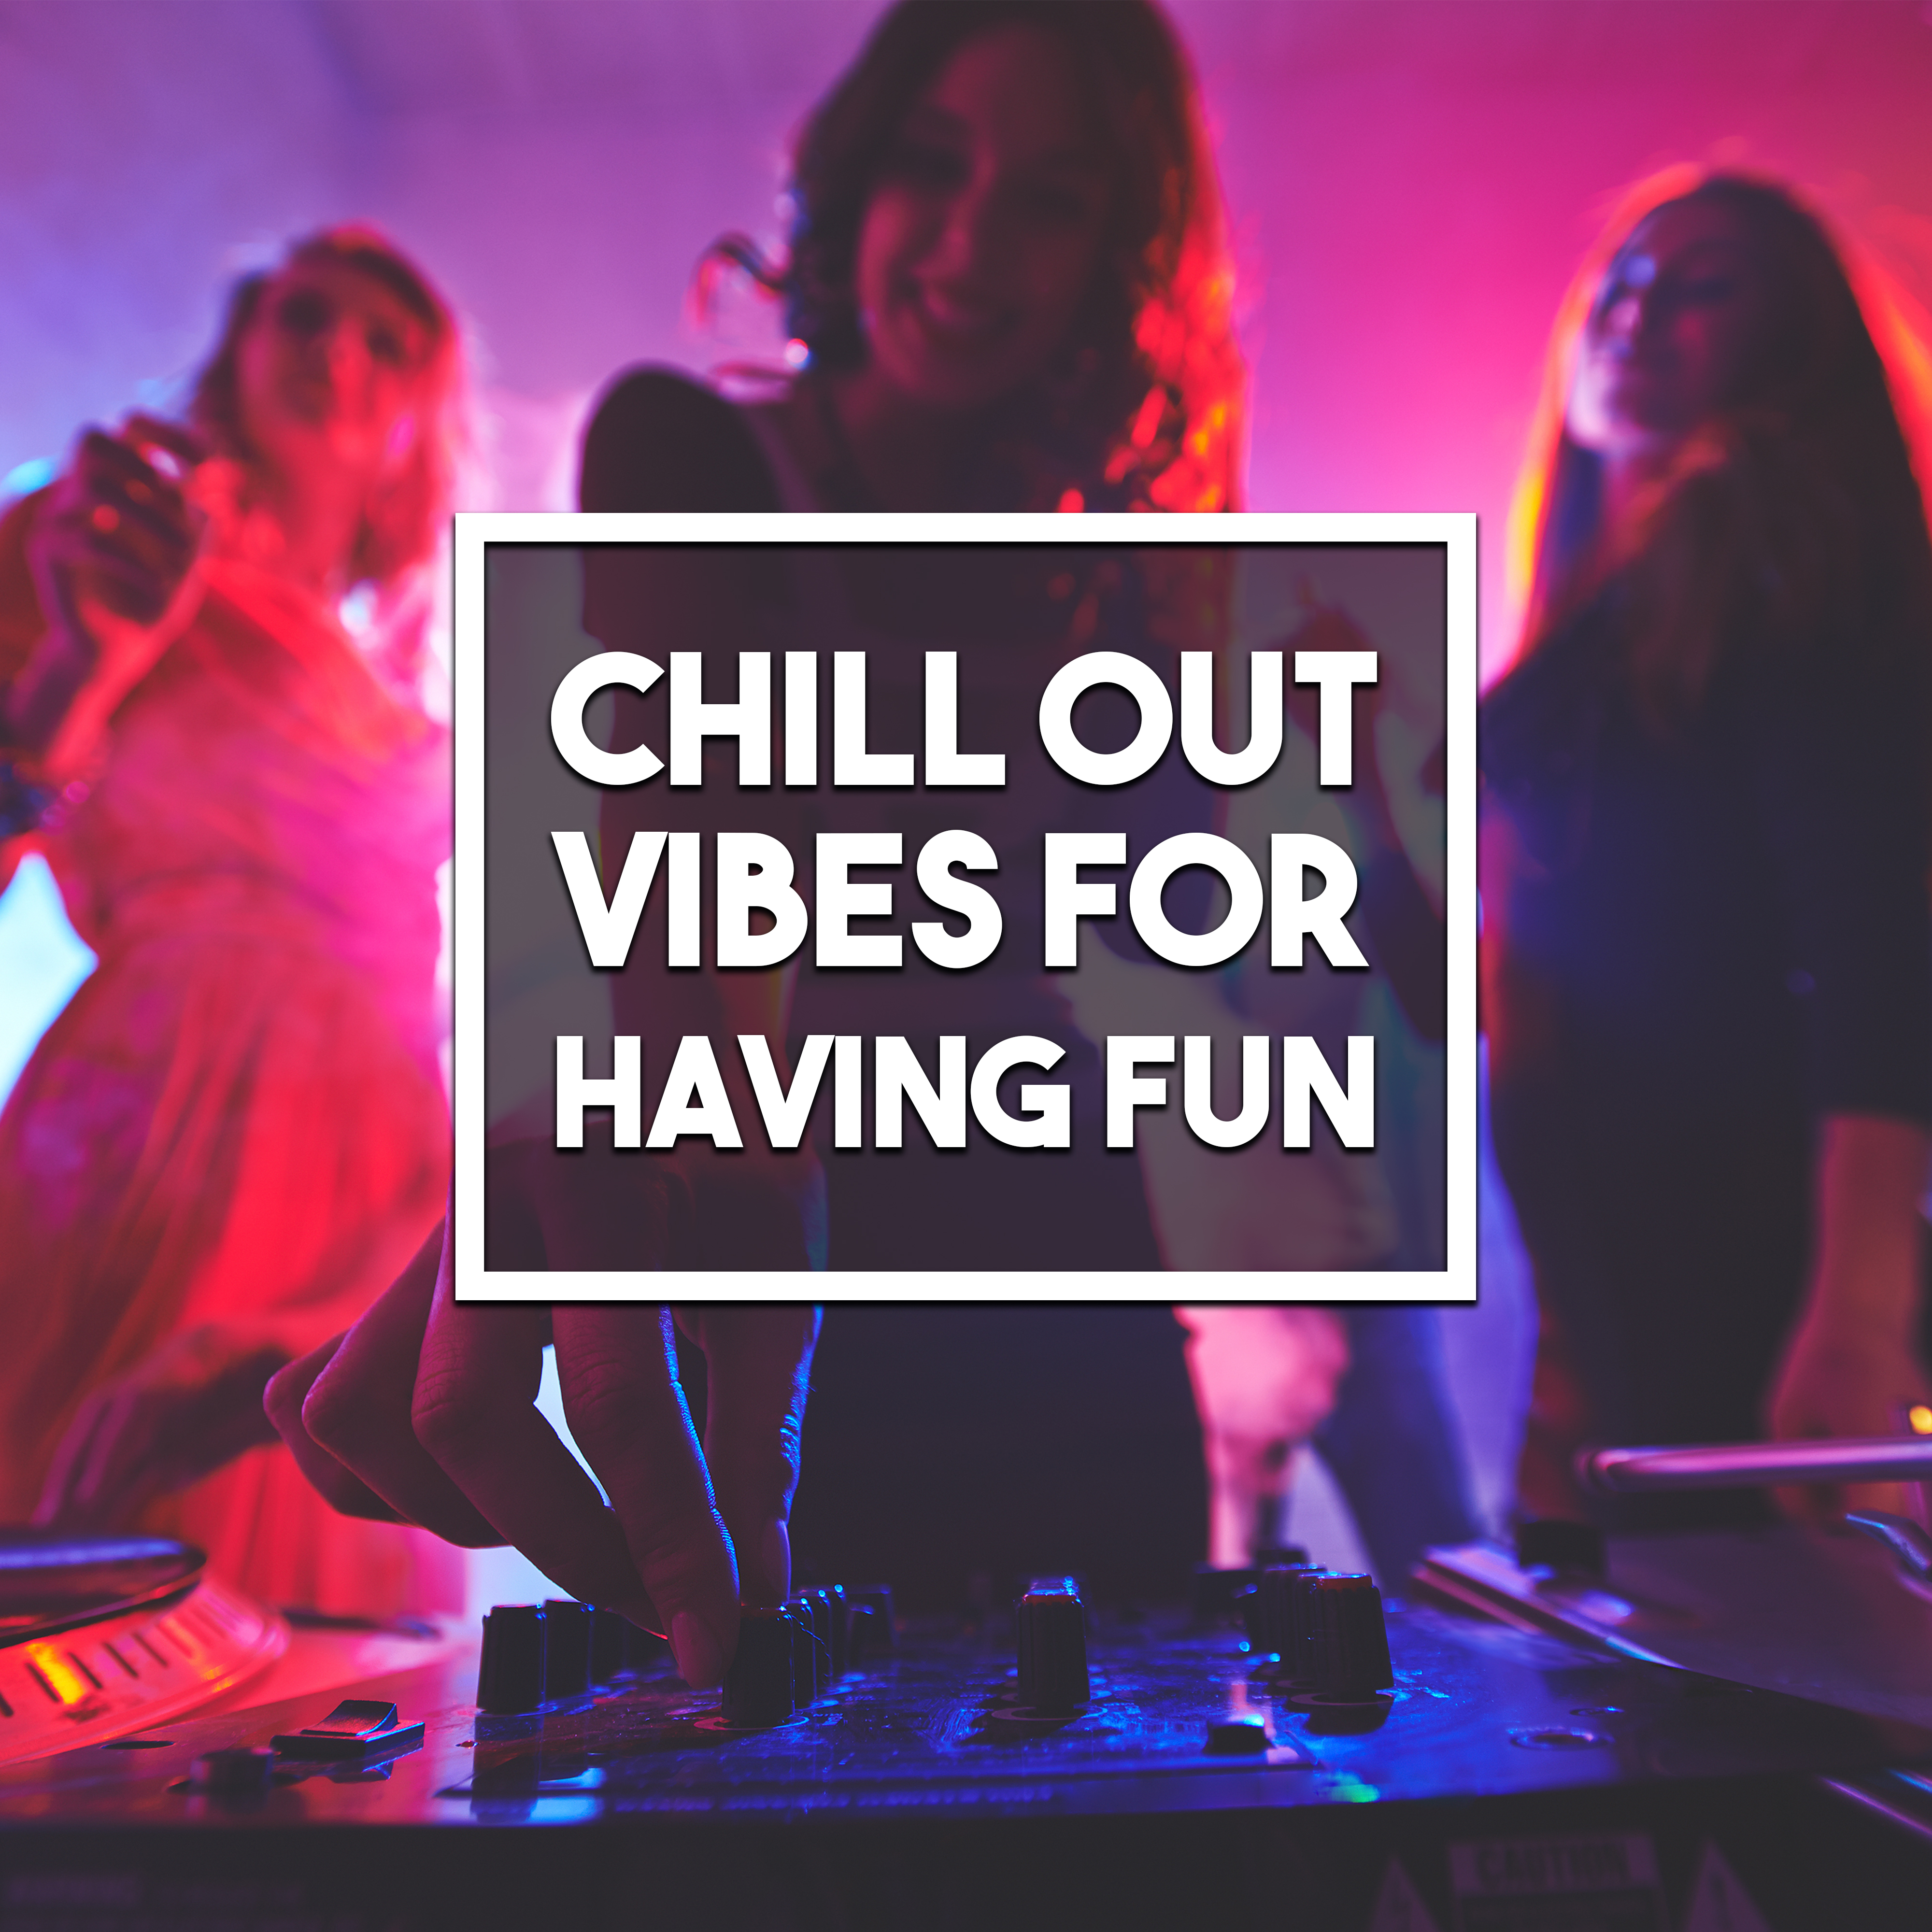 Chill Out Vibes for Having Fun – Ibiza Party Music, Beach Drinks, Summer Love, Dance All Night